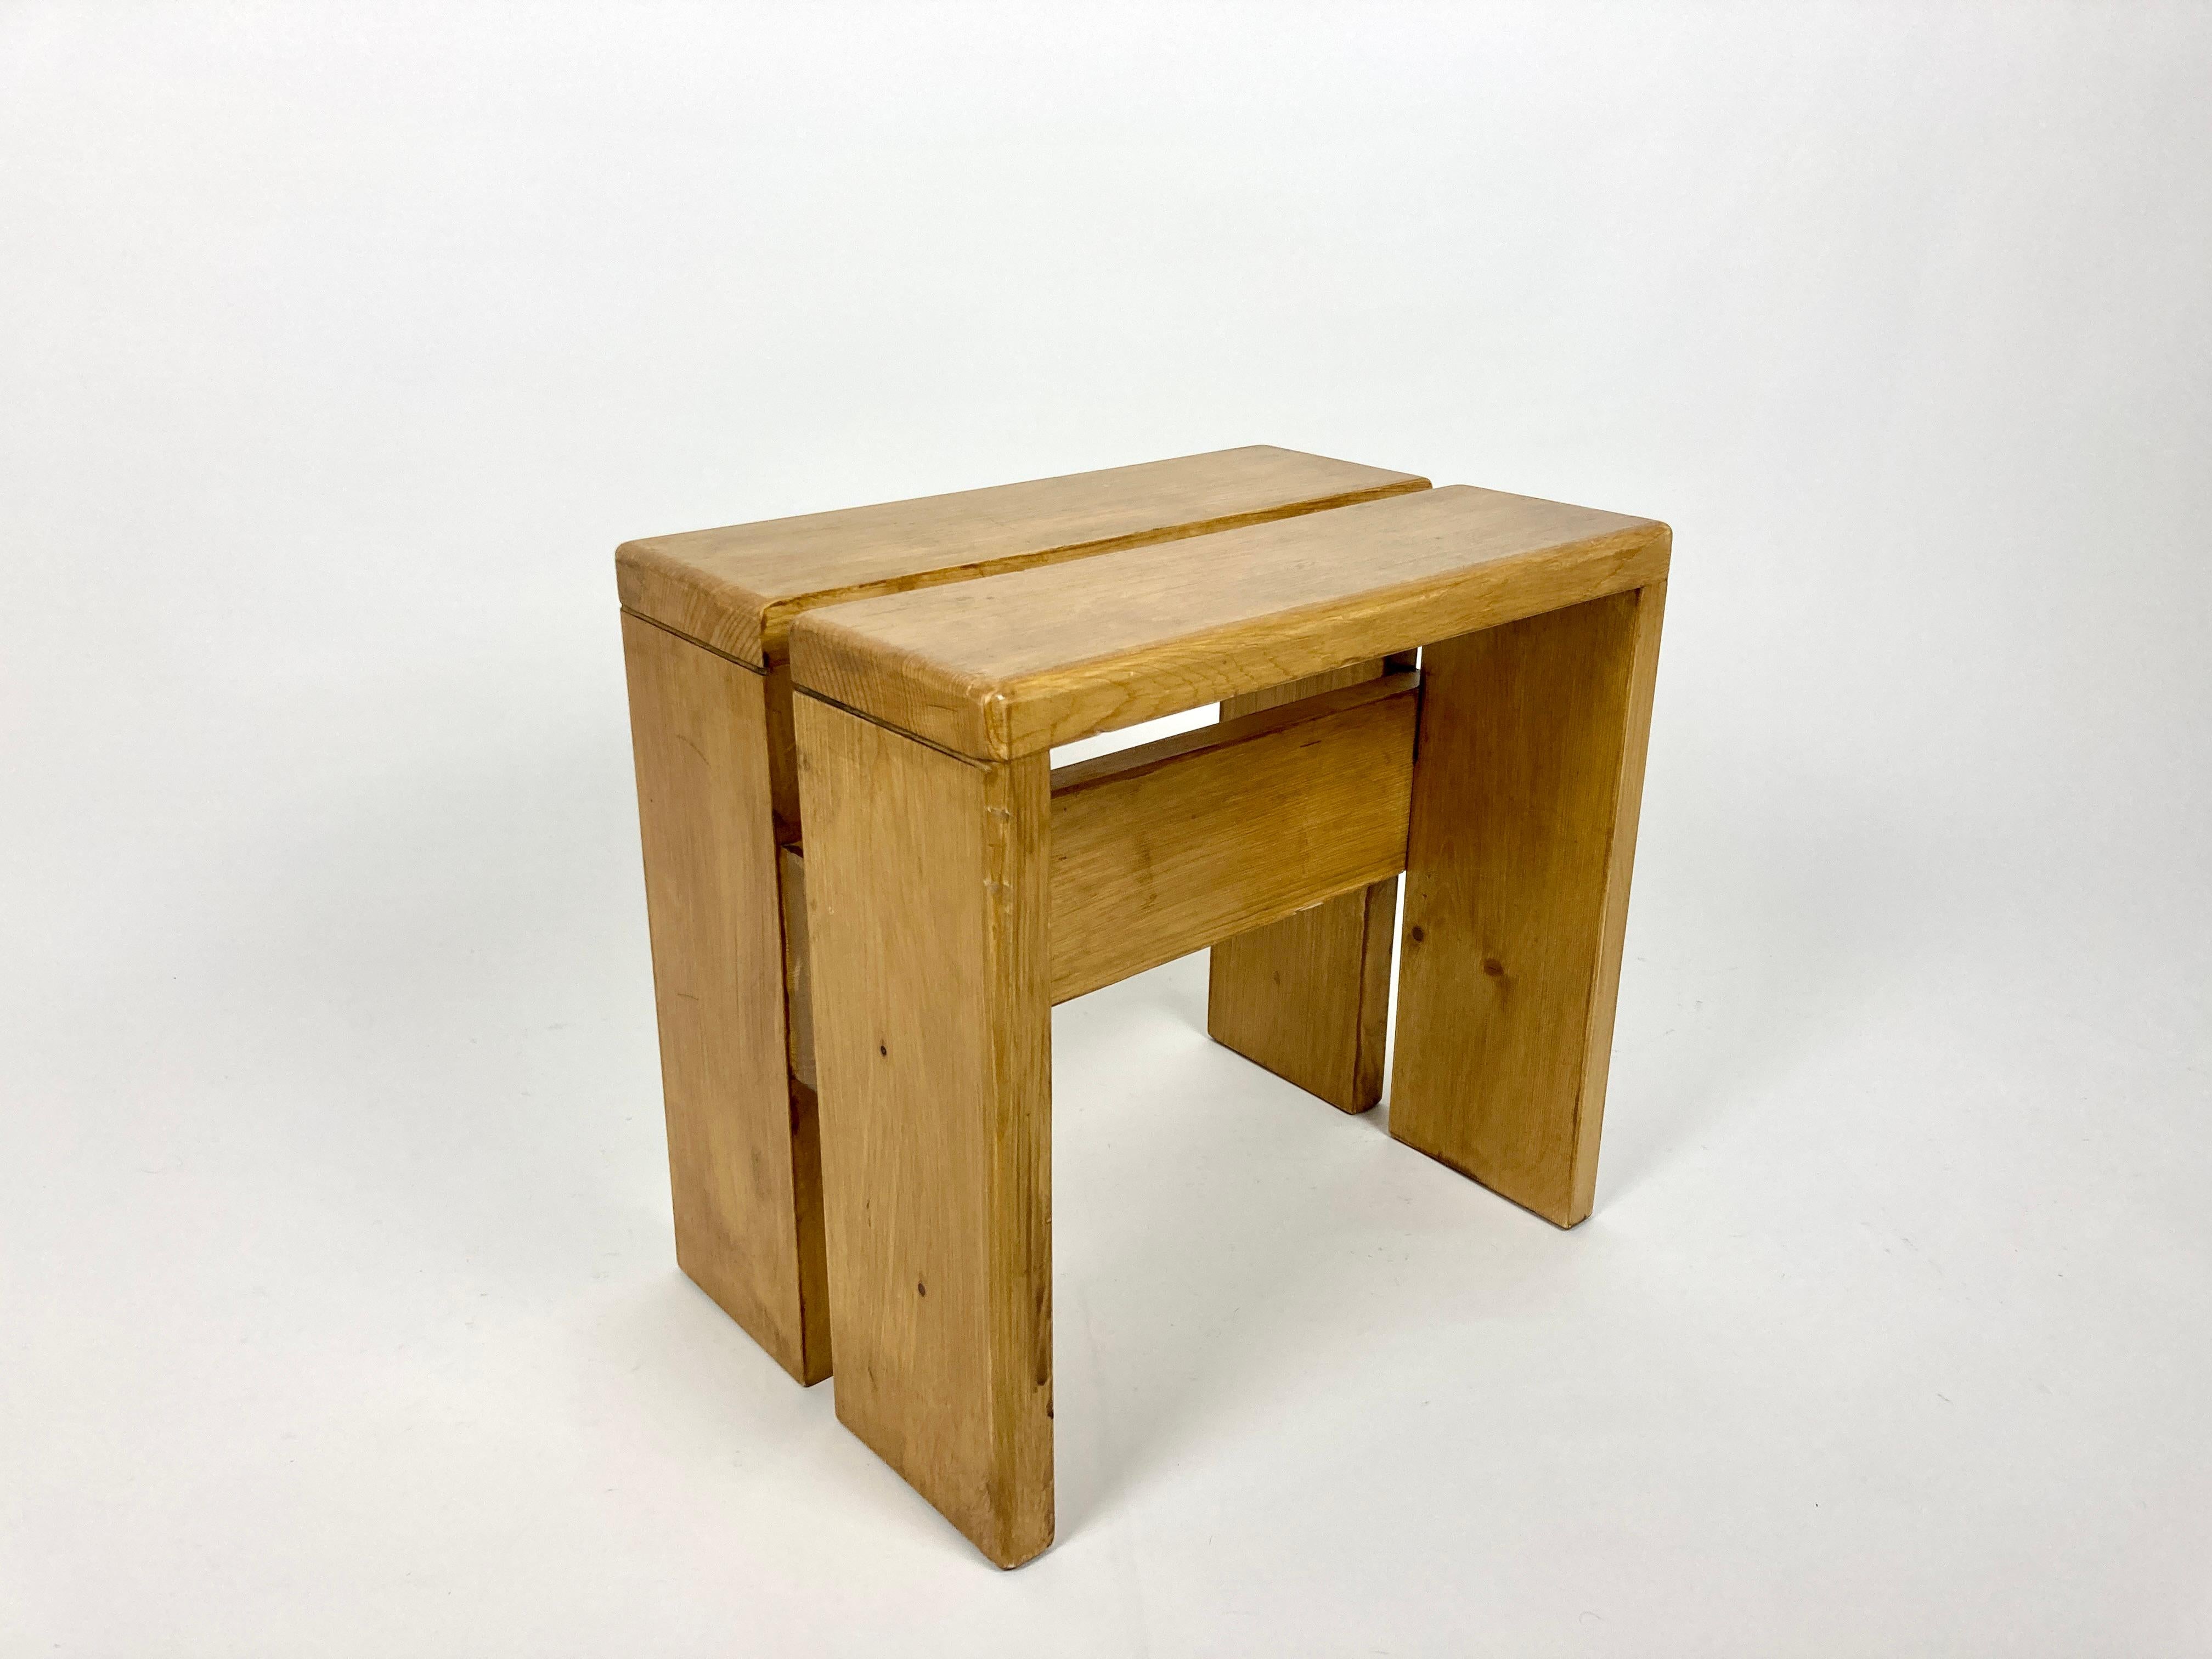 20th Century Stools/Side Table from Les Arcs, France 1970s, Charlotte Perriand